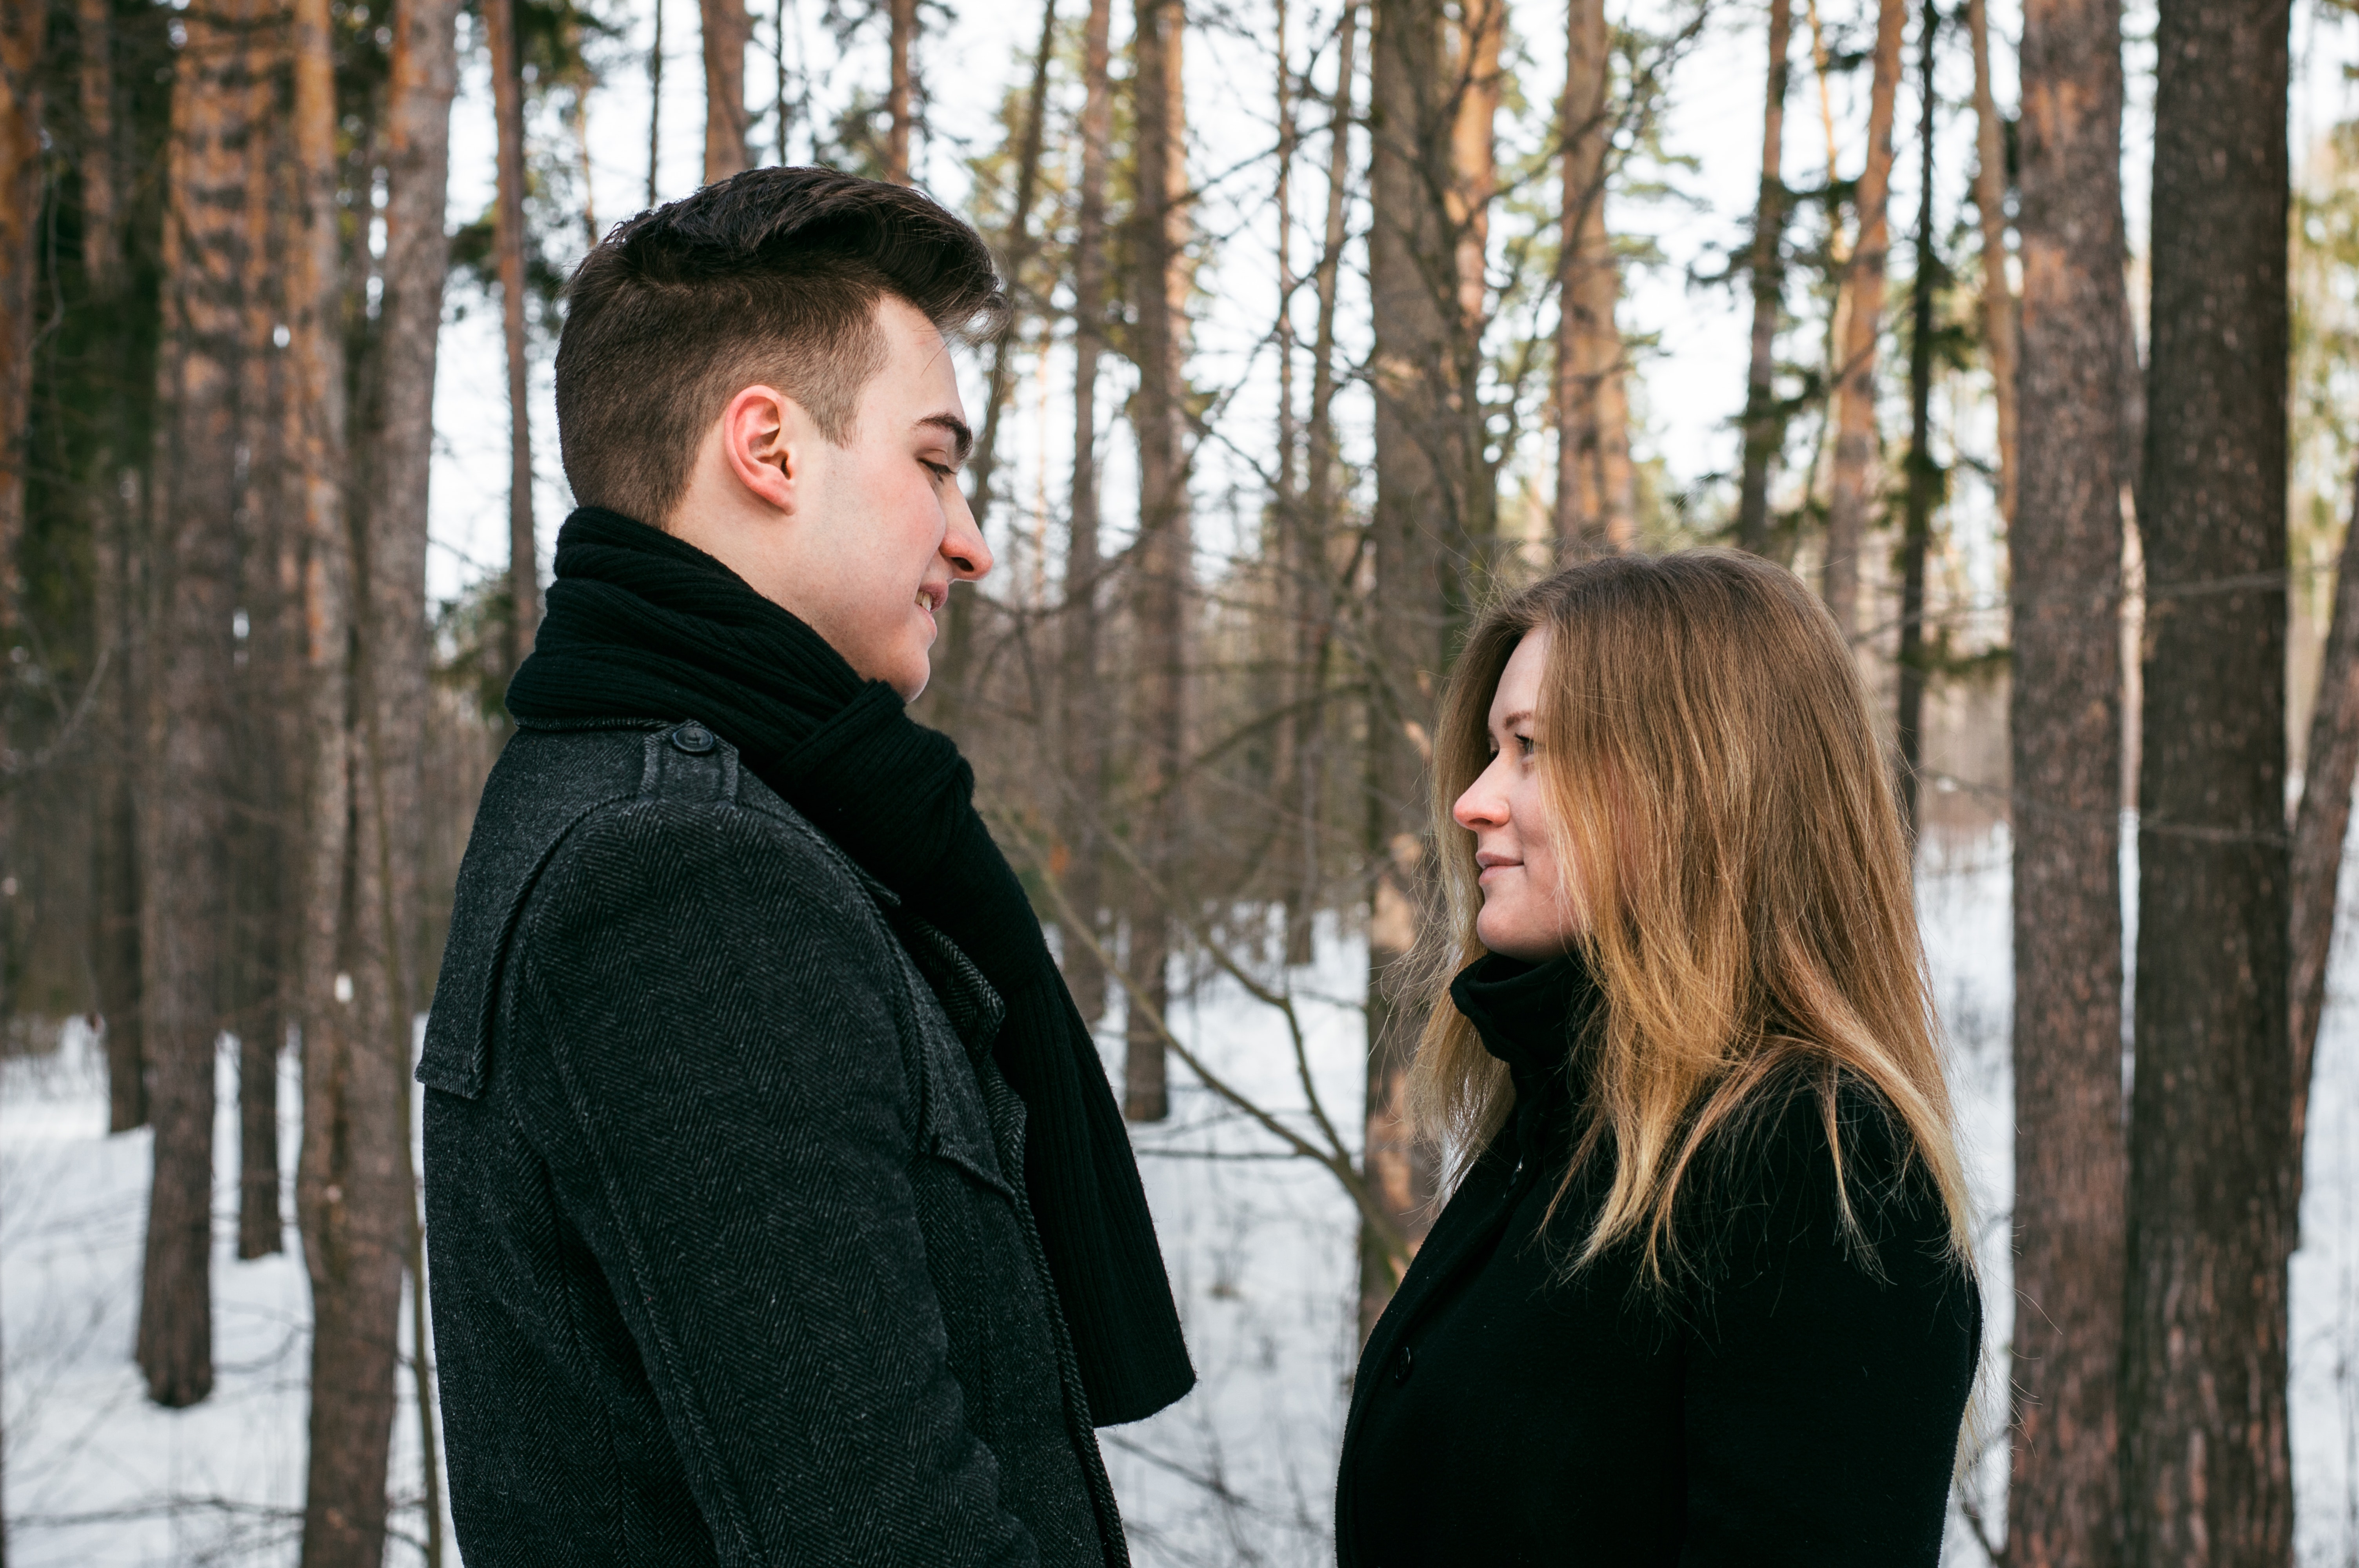 Man and woman wearing black coats standing near snow-covered trees photo